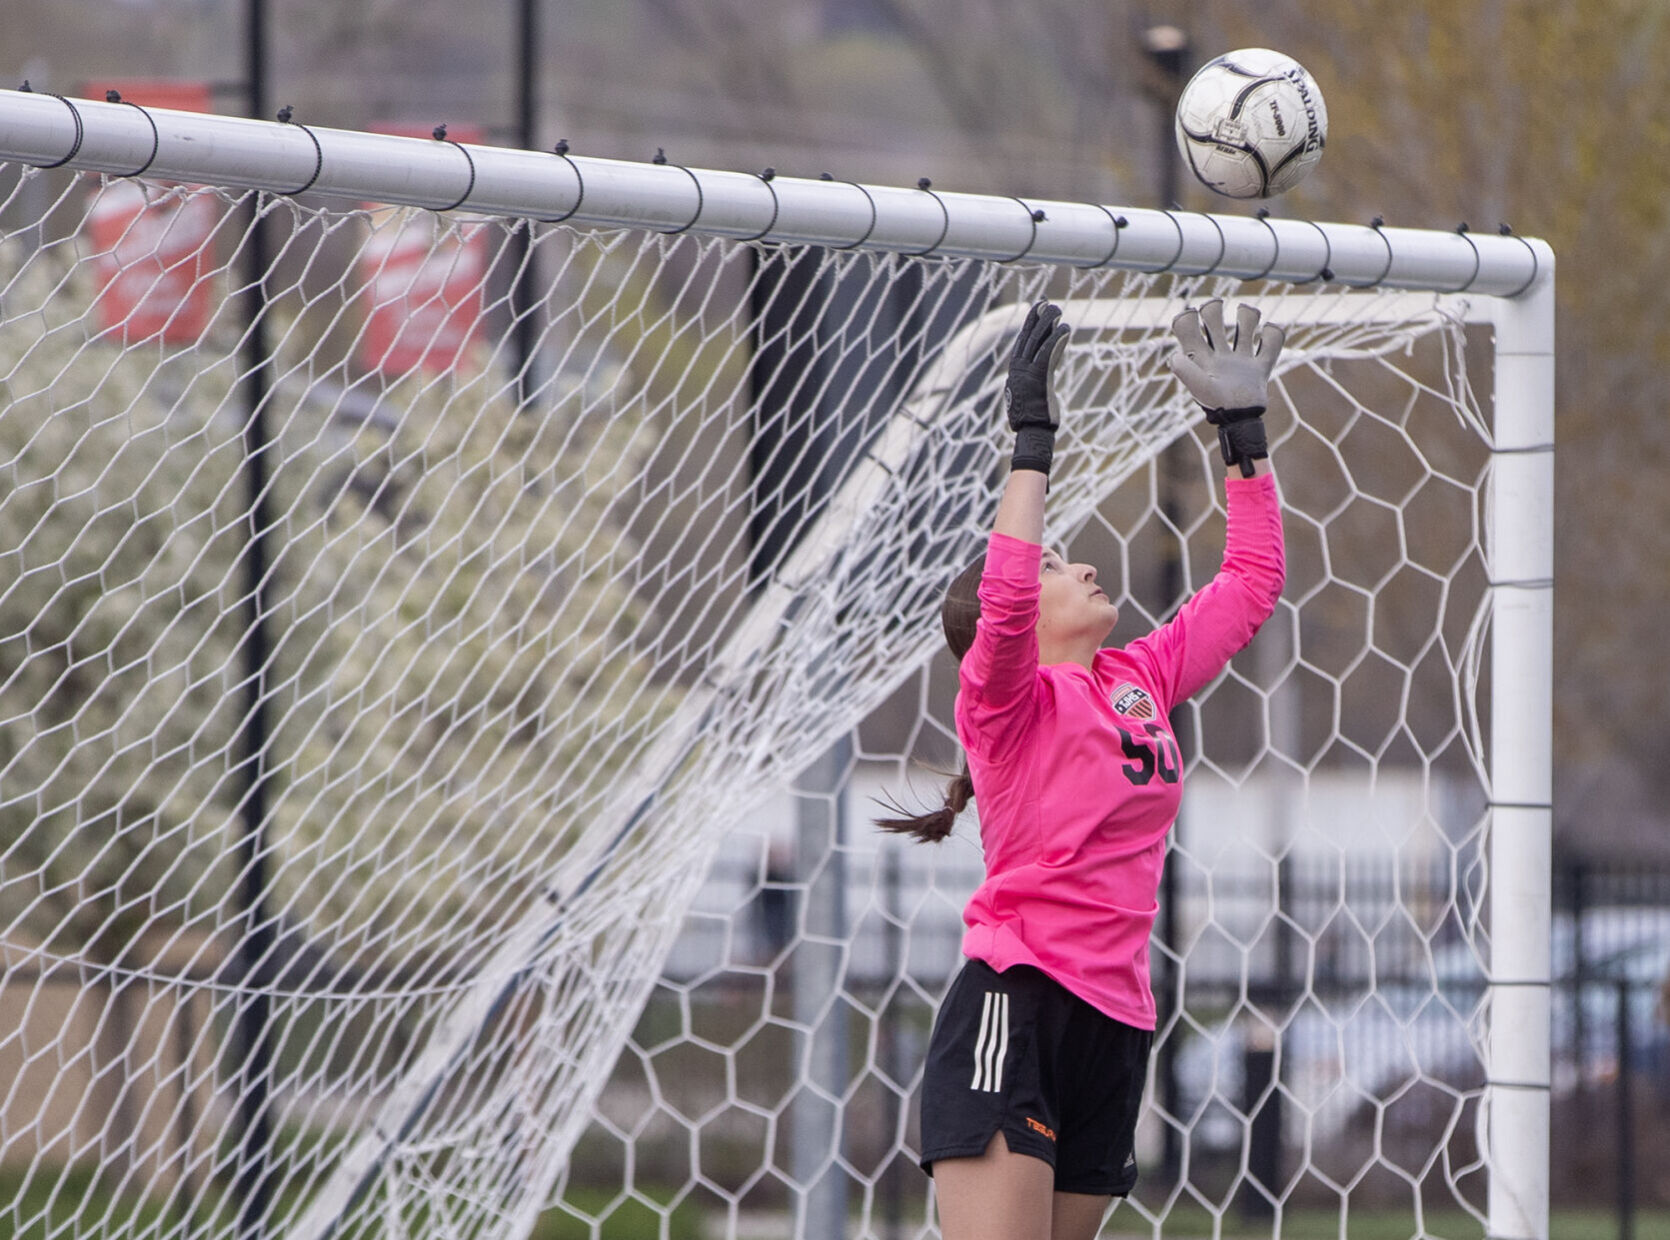 Tuesday May 7 Soccer Results: TJ Girls Triumph on Penalty Shootout, Treynor Girls and Denison-Schleswig Girls Secure Wins, St. Albert Boys Dominate